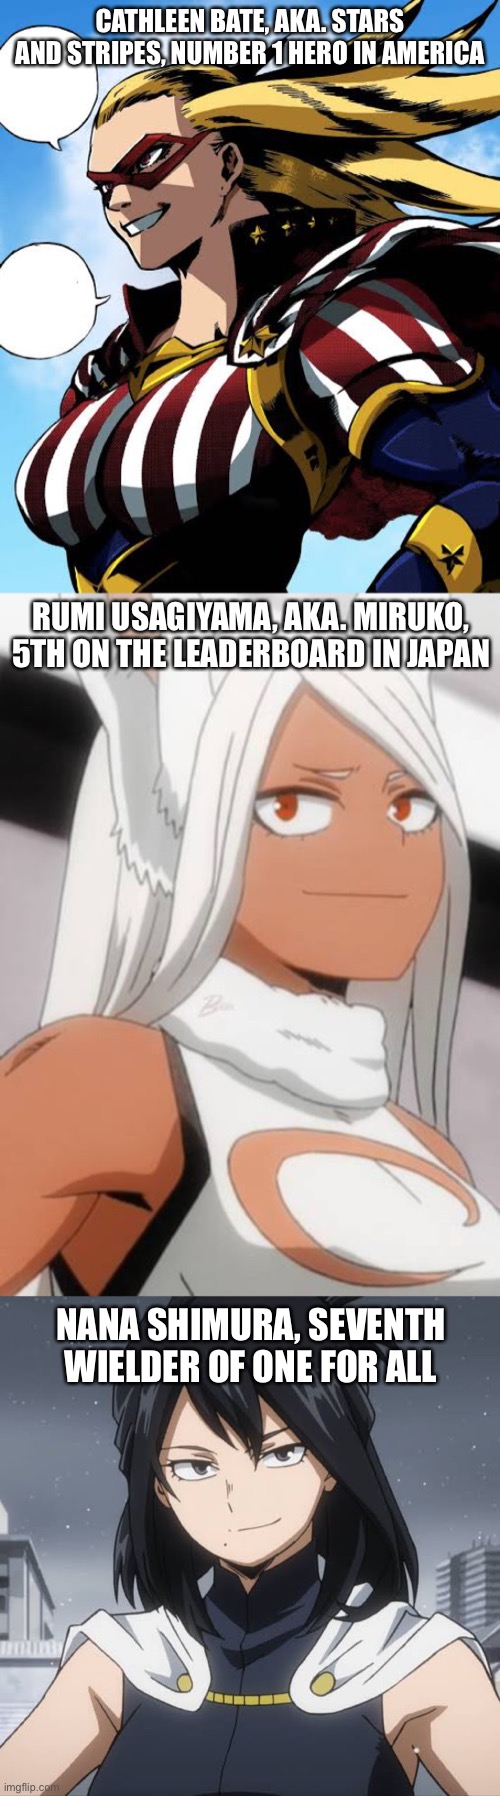 Some of the most powerful heroines in MHA. And they said anime was sexist! | CATHLEEN BATE, AKA. STARS AND STRIPES, NUMBER 1 HERO IN AMERICA; RUMI USAGIYAMA, AKA. MIRUKO, 5TH ON THE LEADERBOARD IN JAPAN; NANA SHIMURA, SEVENTH WIELDER OF ONE FOR ALL | made w/ Imgflip meme maker